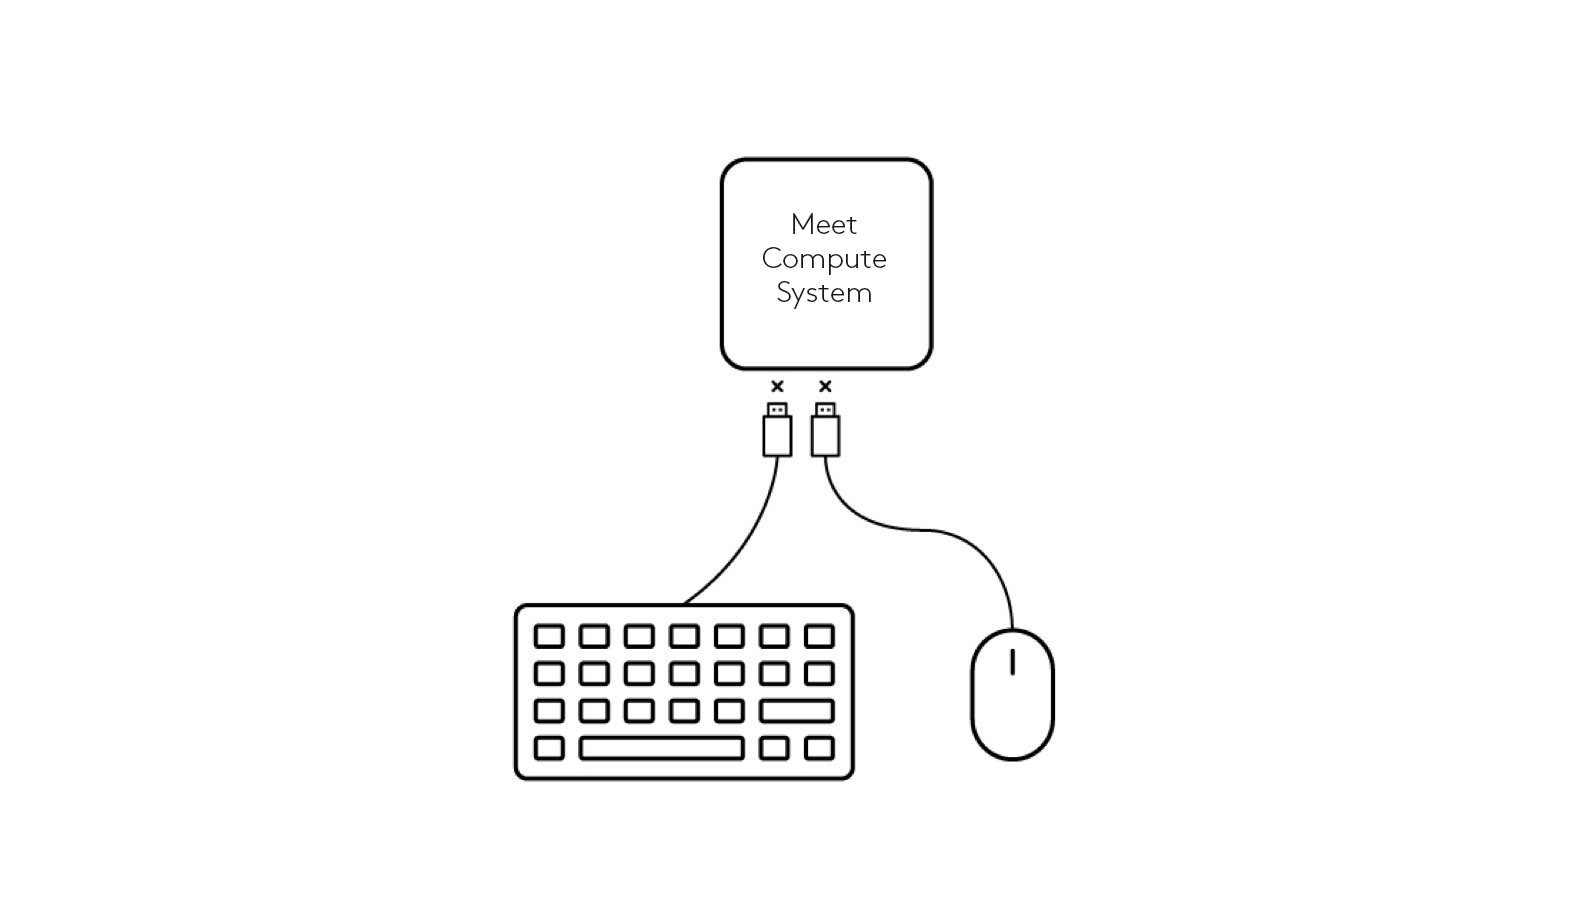 Diagram of disconnecting keyboard and mouse to Meet Compute System